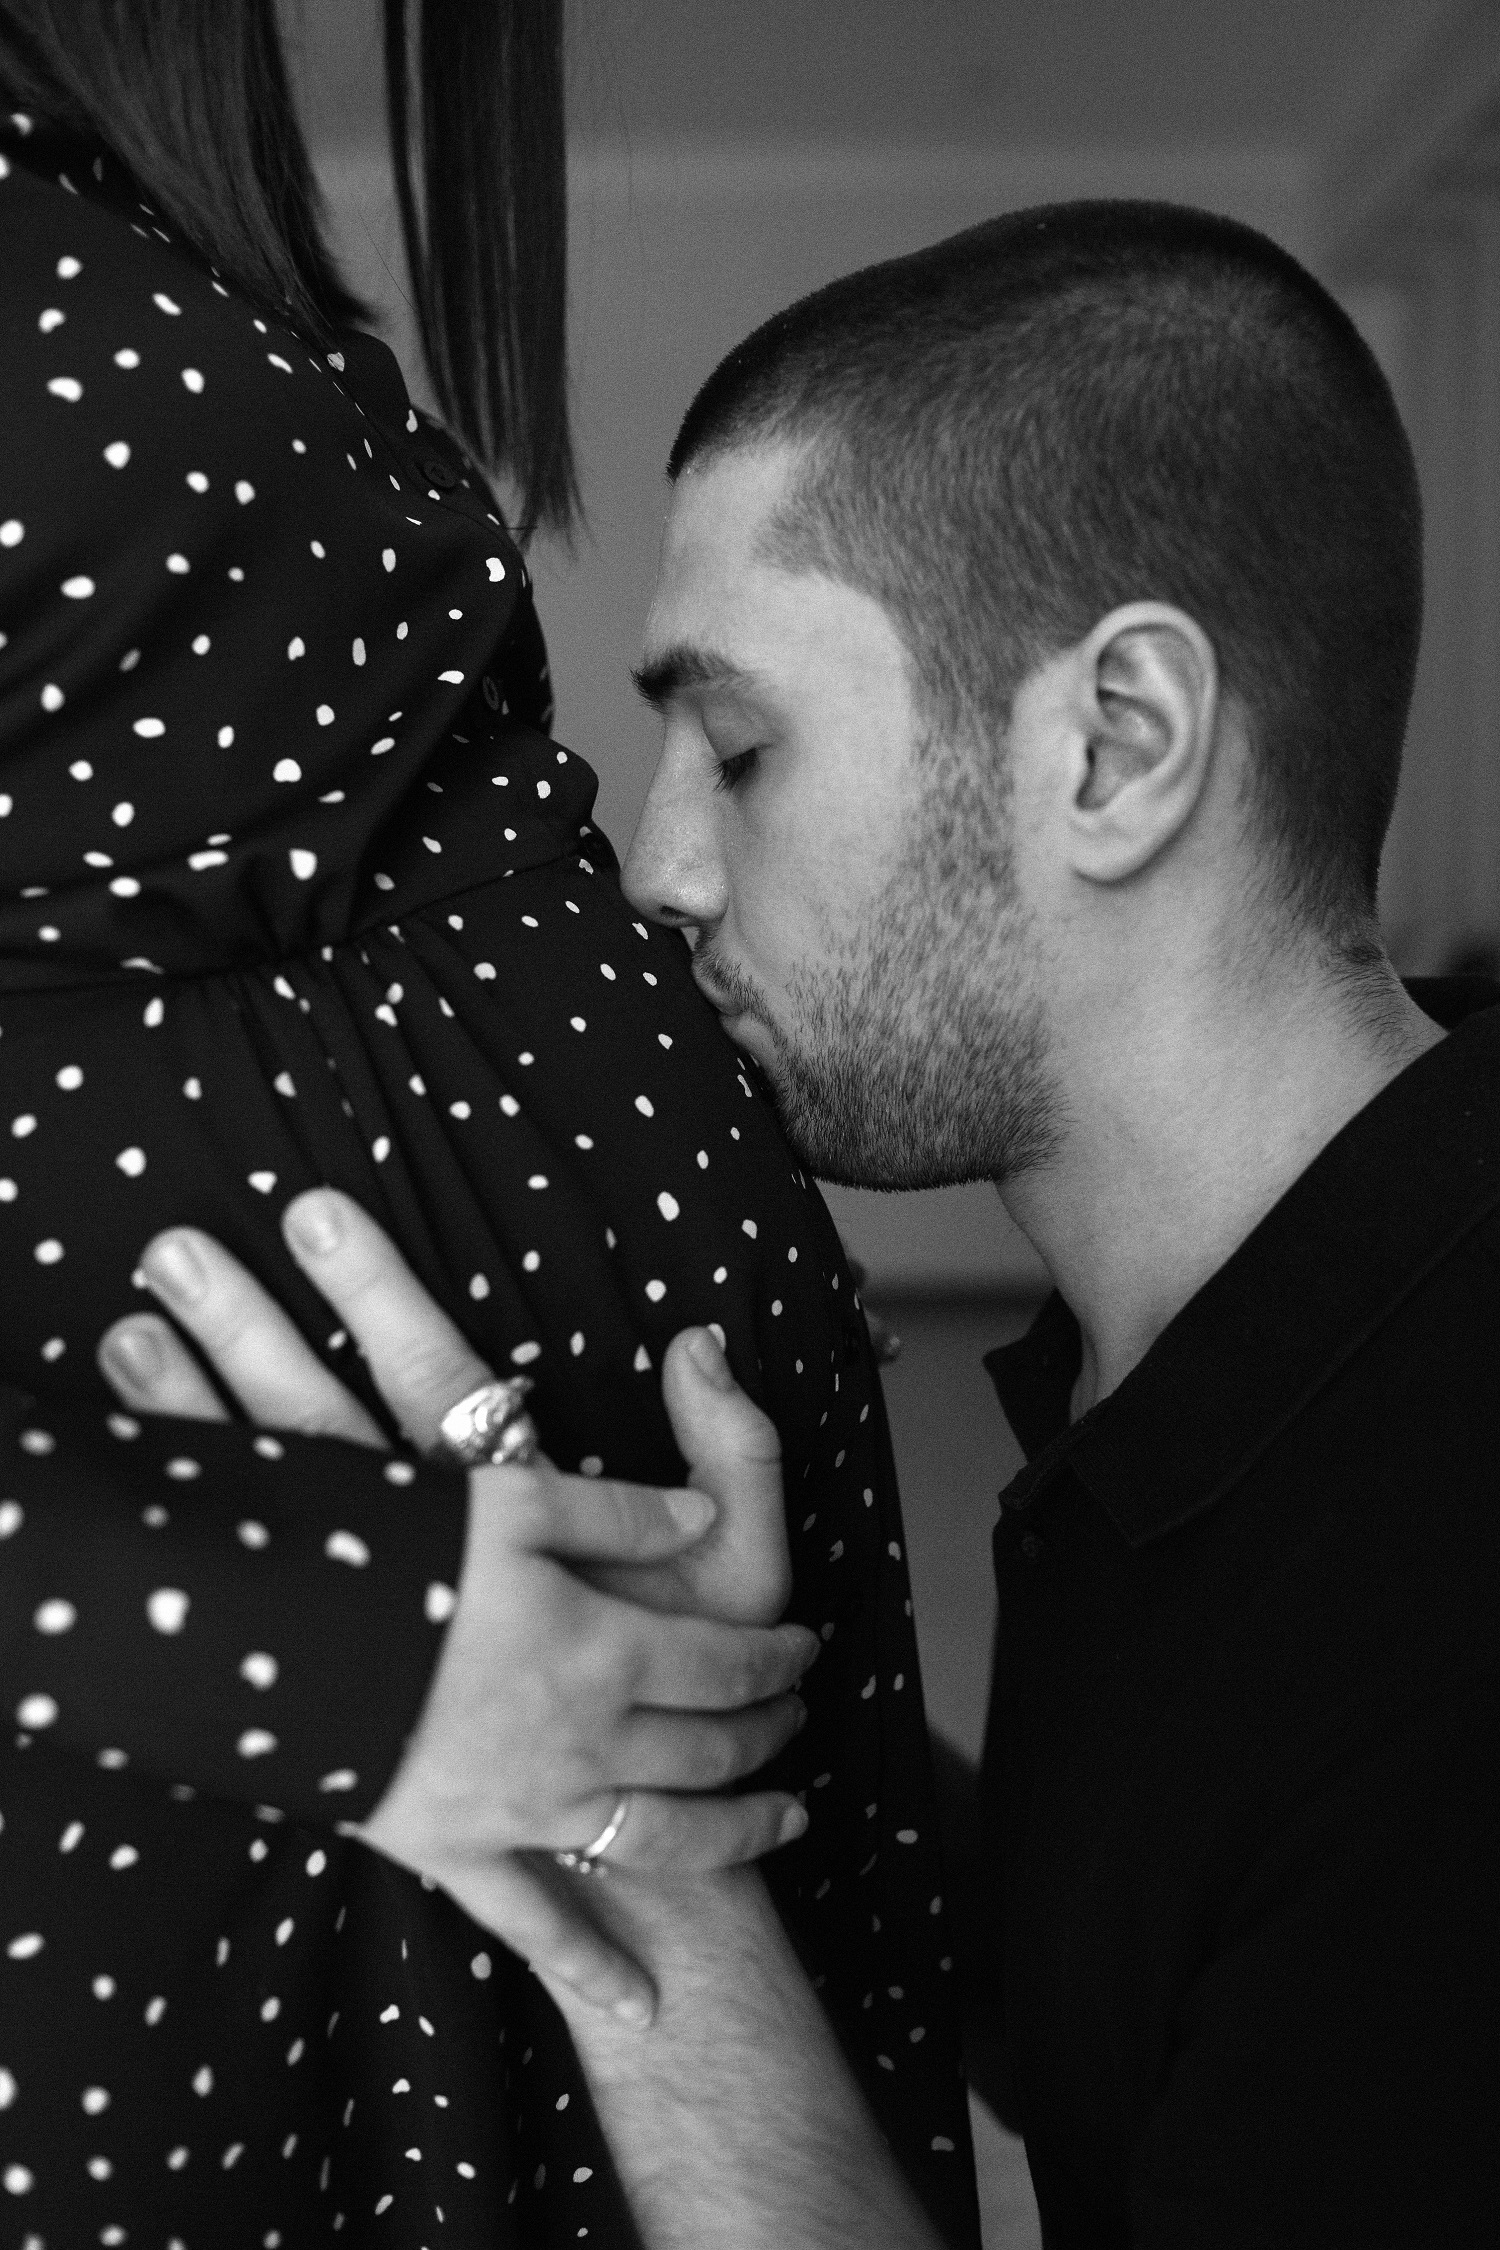 The man is kissing the belly of a woman expecting a baby